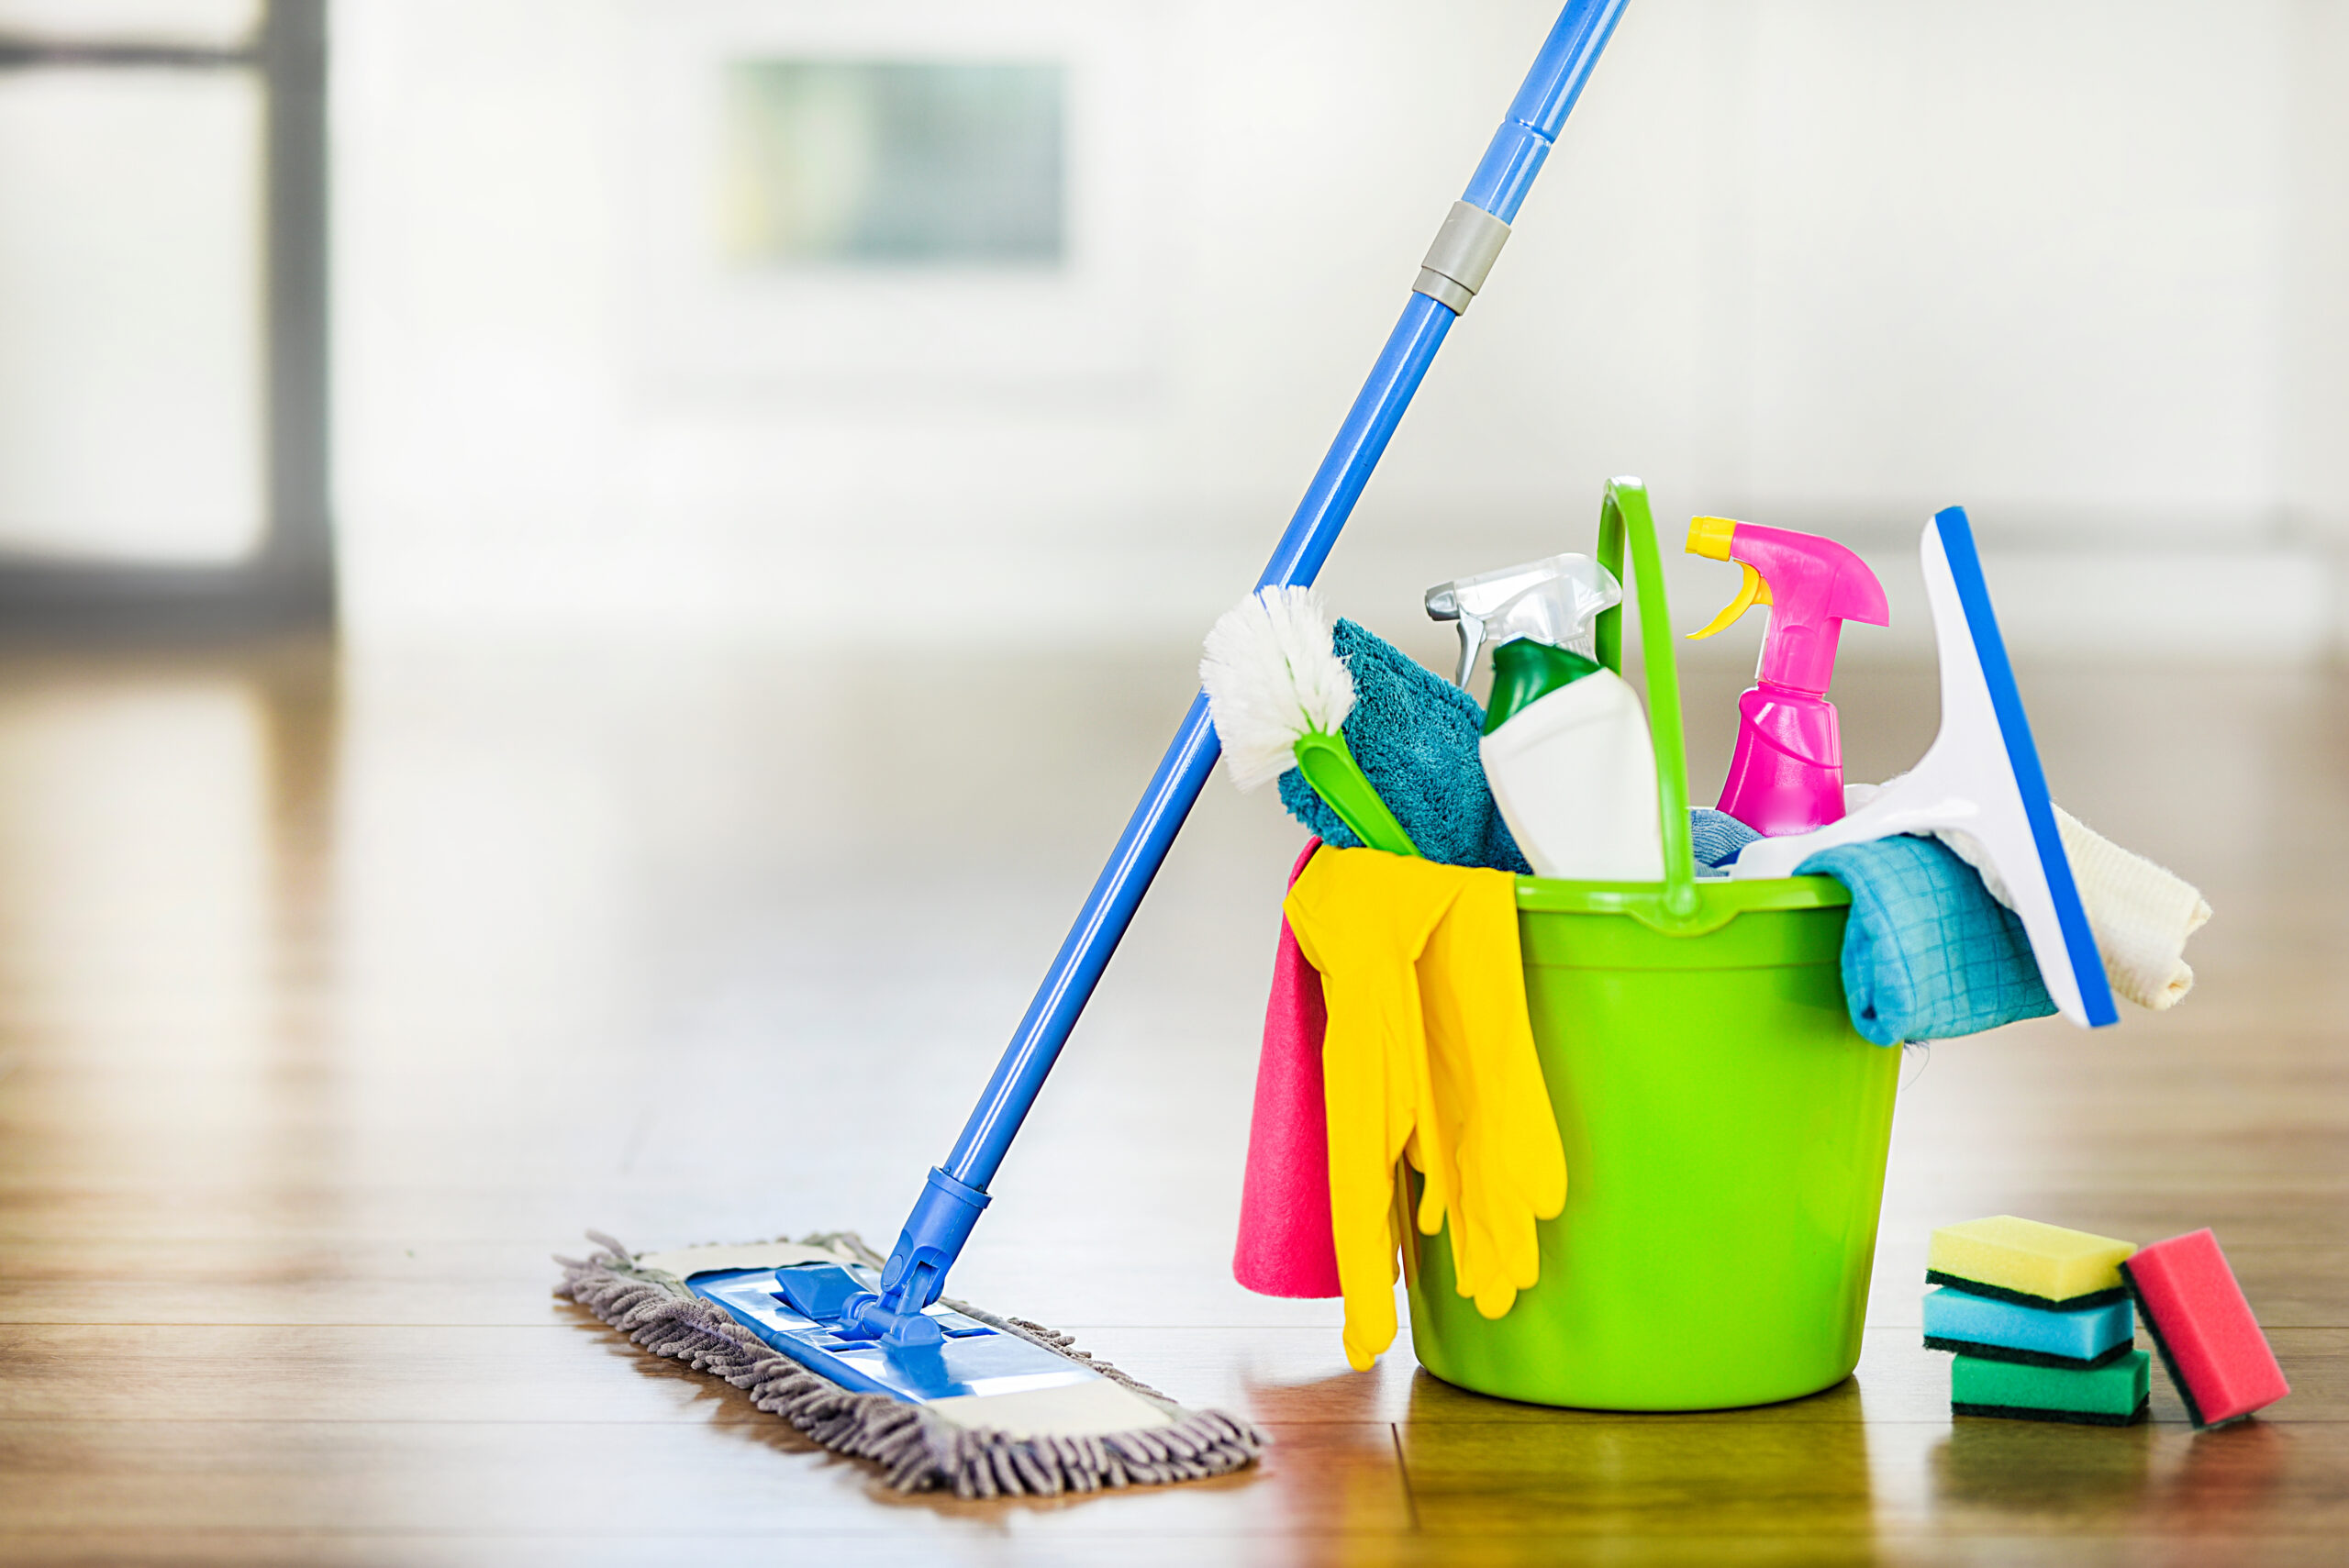 The 20 Benefits of Hiring a Professional Team to Clean Your Office Floors